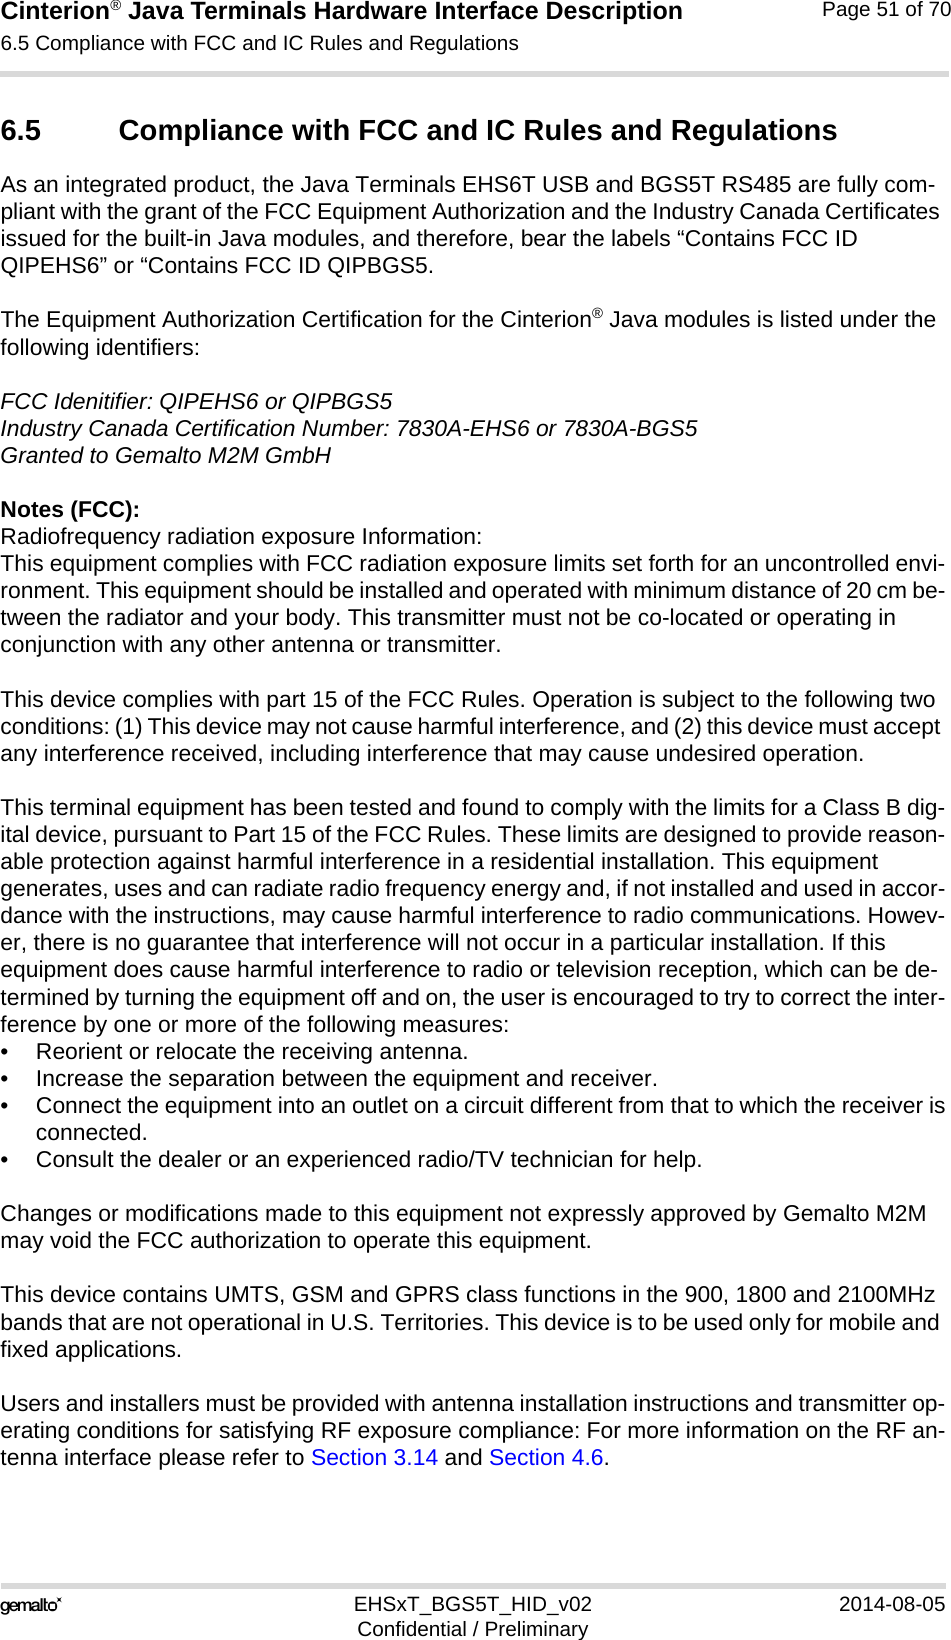 Cinterion® Java Terminals Hardware Interface Description6.5 Compliance with FCC and IC Rules and Regulations52EHSxT_BGS5T_HID_v02 2014-08-05Confidential / PreliminaryPage 51 of 706.5 Compliance with FCC and IC Rules and RegulationsAs an integrated product, the Java Terminals EHS6T USB and BGS5T RS485 are fully com-pliant with the grant of the FCC Equipment Authorization and the Industry Canada Certificates issued for the built-in Java modules, and therefore, bear the labels “Contains FCC ID QIPEHS6” or “Contains FCC ID QIPBGS5.The Equipment Authorization Certification for the Cinterion® Java modules is listed under the following identifiers:FCC Idenitifier: QIPEHS6 or QIPBGS5Industry Canada Certification Number: 7830A-EHS6 or 7830A-BGS5Granted to Gemalto M2M GmbHNotes (FCC): Radiofrequency radiation exposure Information:This equipment complies with FCC radiation exposure limits set forth for an uncontrolled envi-ronment. This equipment should be installed and operated with minimum distance of 20 cm be-tween the radiator and your body. This transmitter must not be co-located or operating in conjunction with any other antenna or transmitter.This device complies with part 15 of the FCC Rules. Operation is subject to the following two conditions: (1) This device may not cause harmful interference, and (2) this device must accept any interference received, including interference that may cause undesired operation.This terminal equipment has been tested and found to comply with the limits for a Class B dig-ital device, pursuant to Part 15 of the FCC Rules. These limits are designed to provide reason-able protection against harmful interference in a residential installation. This equipment generates, uses and can radiate radio frequency energy and, if not installed and used in accor-dance with the instructions, may cause harmful interference to radio communications. Howev-er, there is no guarantee that interference will not occur in a particular installation. If this equipment does cause harmful interference to radio or television reception, which can be de-termined by turning the equipment off and on, the user is encouraged to try to correct the inter-ference by one or more of the following measures:• Reorient or relocate the receiving antenna.• Increase the separation between the equipment and receiver.• Connect the equipment into an outlet on a circuit different from that to which the receiver isconnected.• Consult the dealer or an experienced radio/TV technician for help.Changes or modifications made to this equipment not expressly approved by Gemalto M2M may void the FCC authorization to operate this equipment. This device contains UMTS, GSM and GPRS class functions in the 900, 1800 and 2100MHz bands that are not operational in U.S. Territories. This device is to be used only for mobile and fixed applications.Users and installers must be provided with antenna installation instructions and transmitter op-erating conditions for satisfying RF exposure compliance: For more information on the RF an-tenna interface please refer to Section 3.14 and Section 4.6.